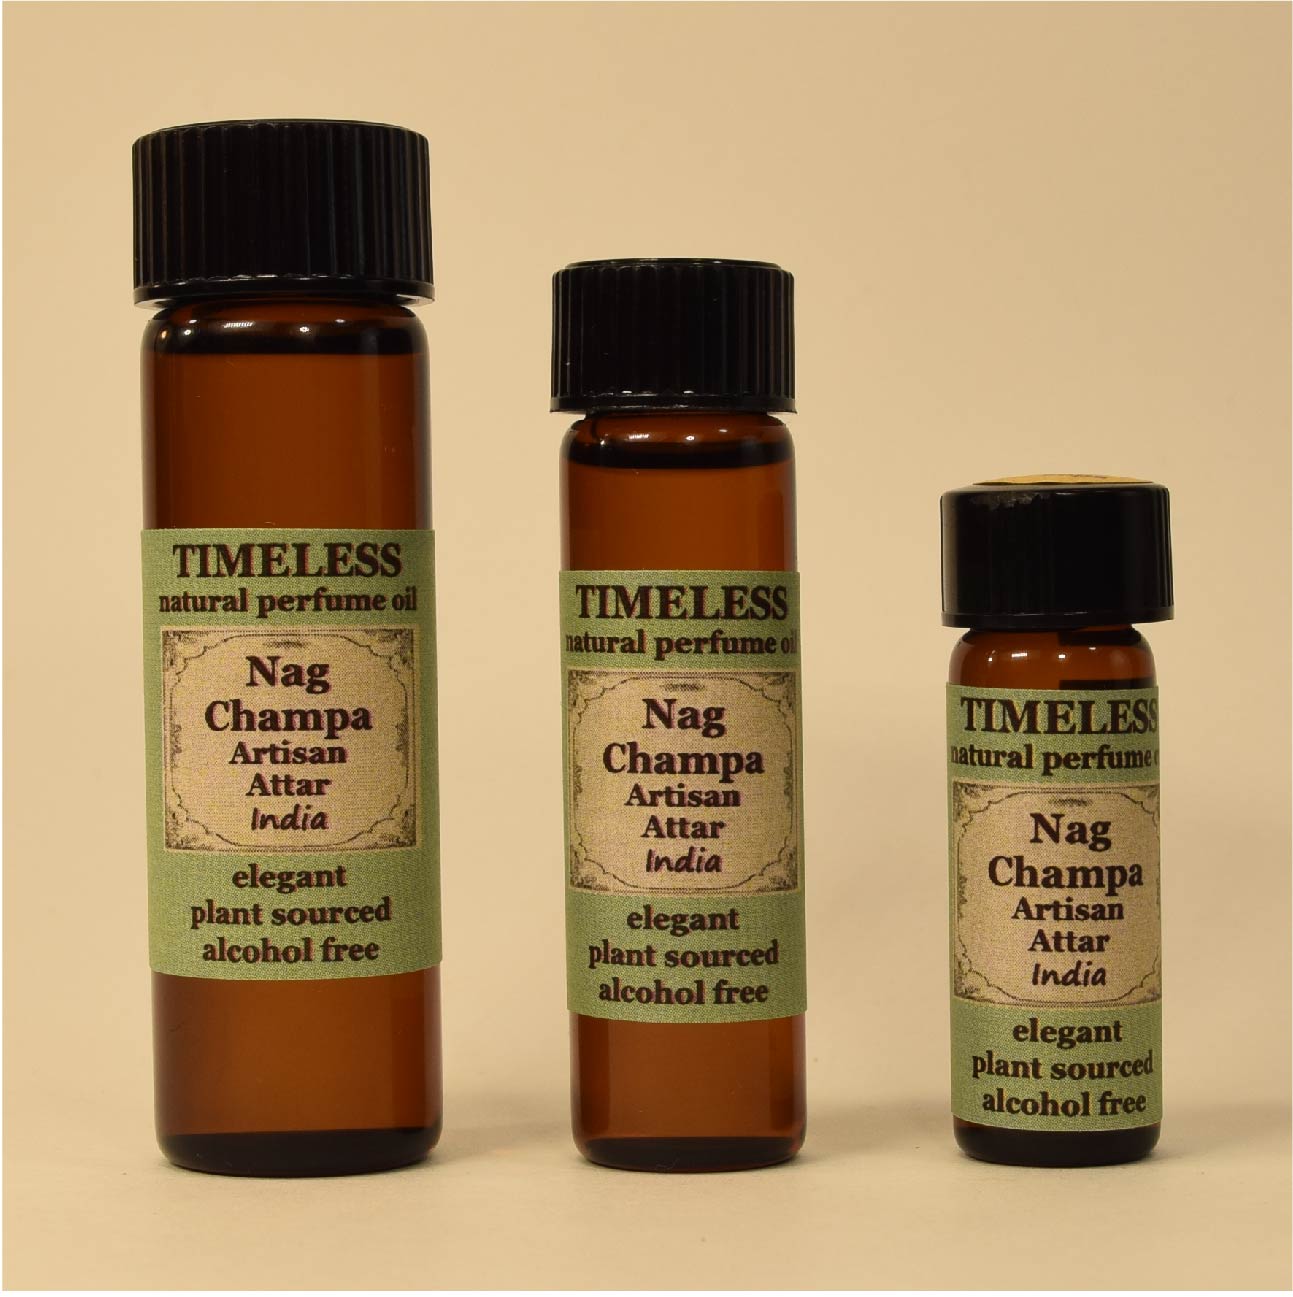 TIMELESS Nag Champa Attar, widely used for calming, meditative influence. –  TIMELESS Essential Oils